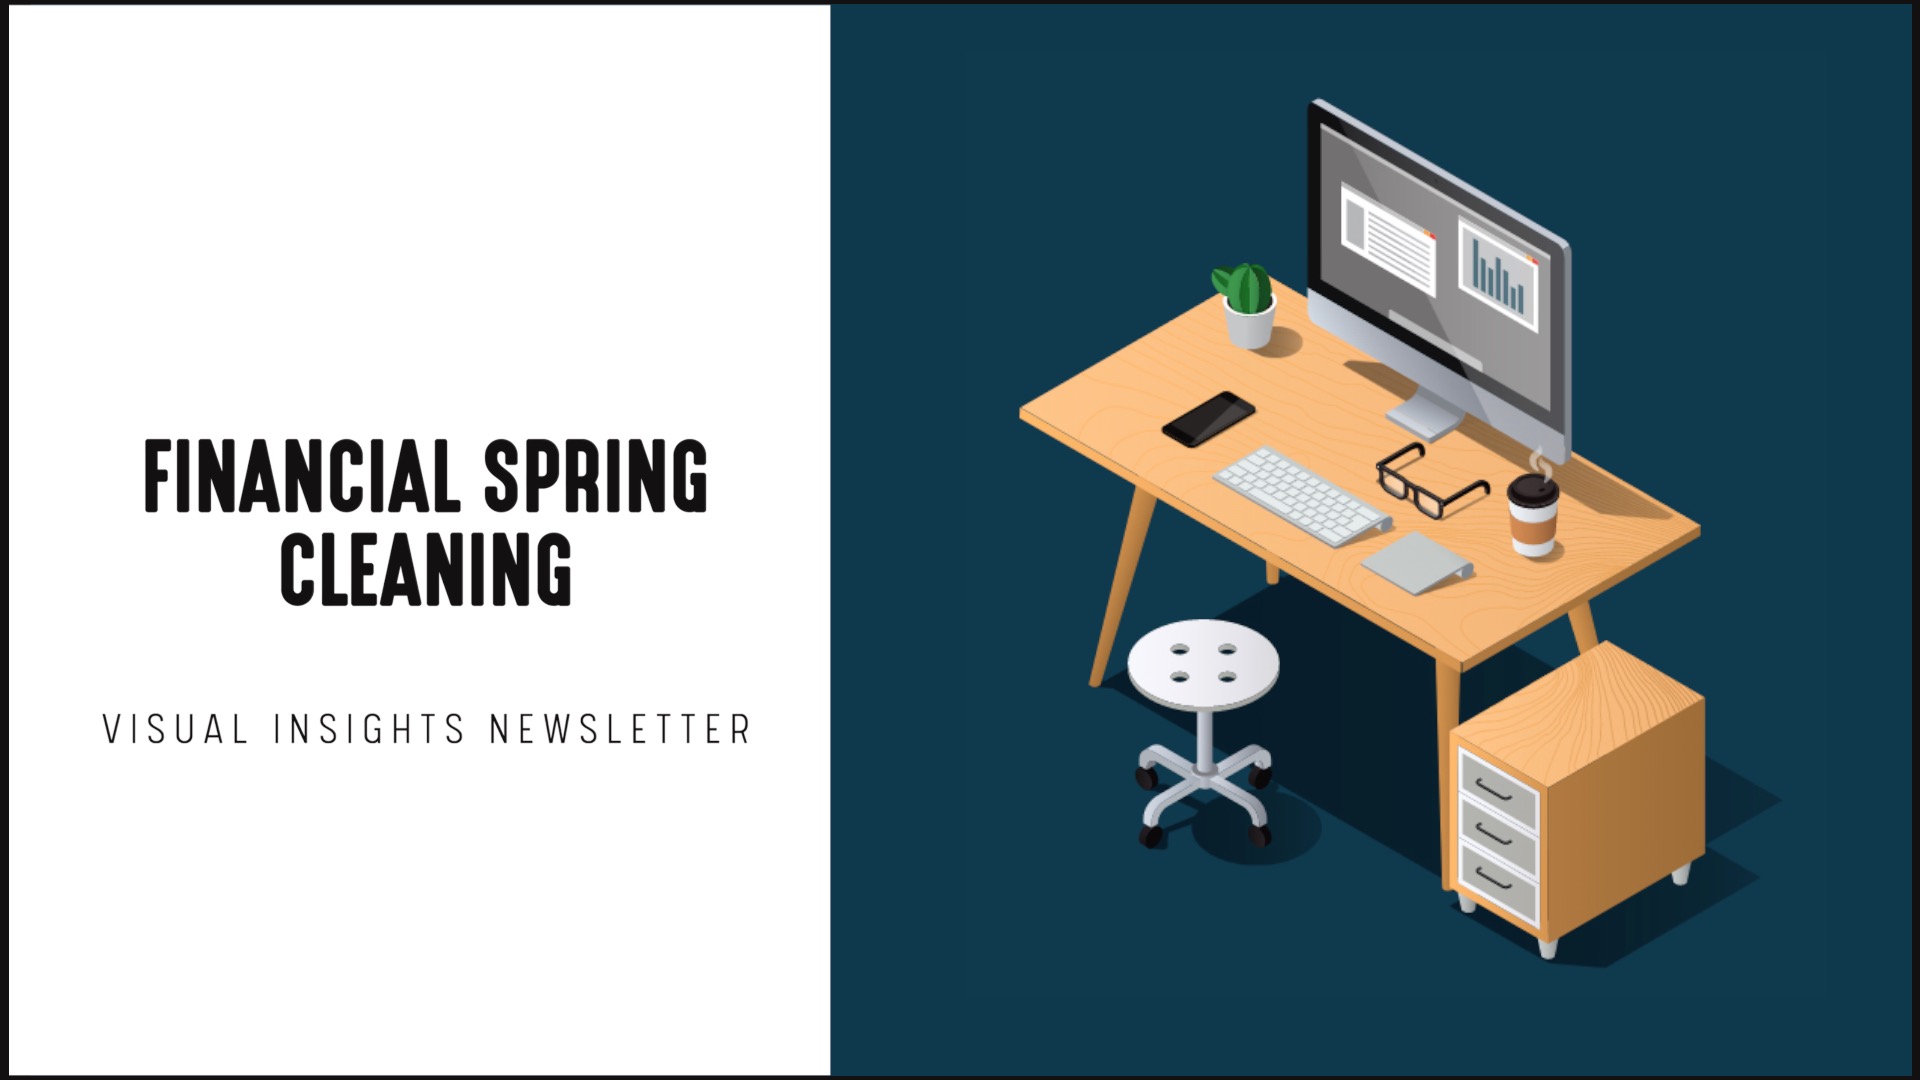 [NEW] Visual Insights Newsletter | Financial Spring Cleaning